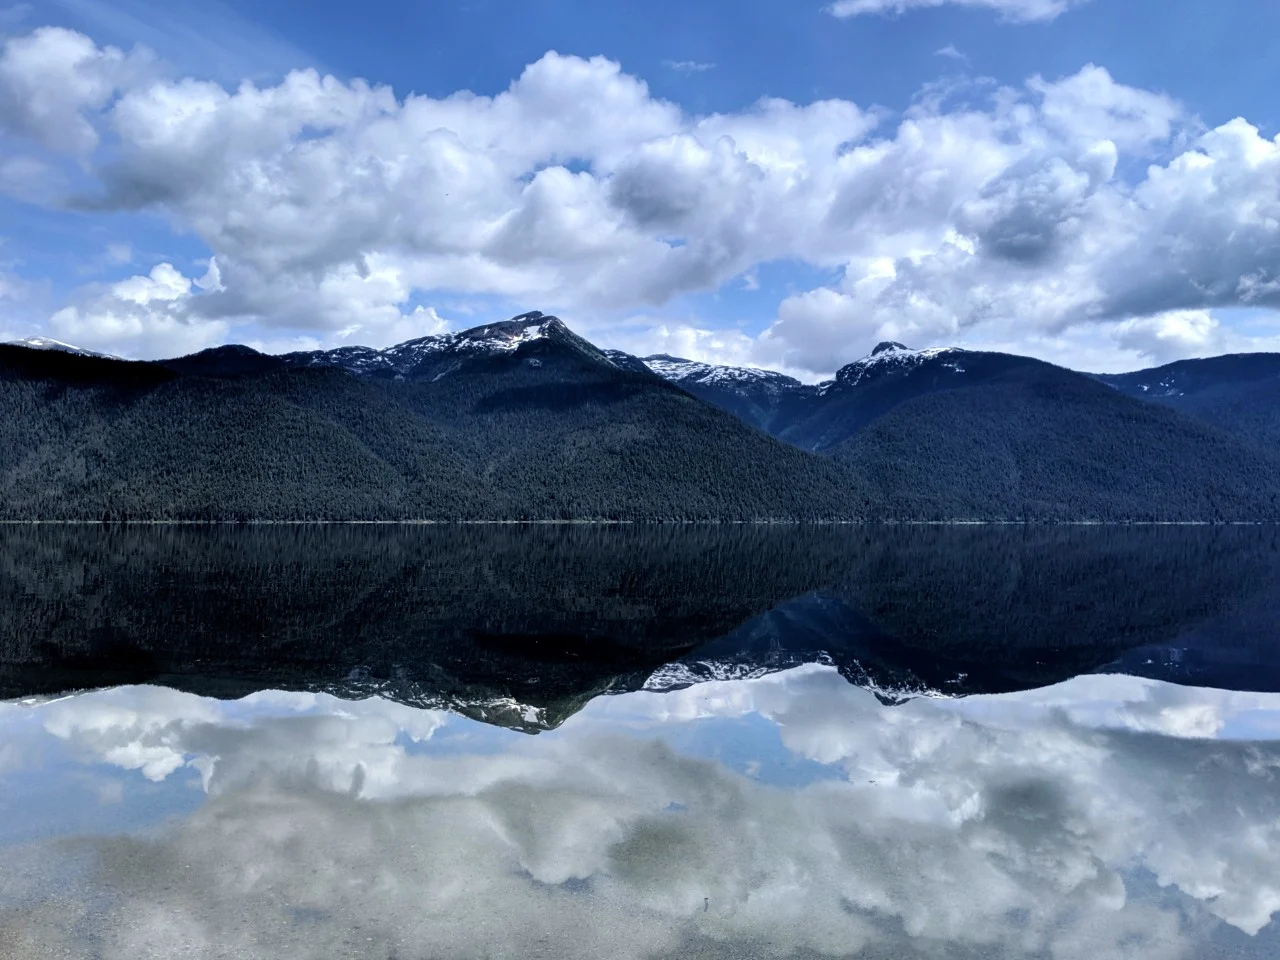 Mirror like effect on alpine lake in Wells Gray Provincial Park